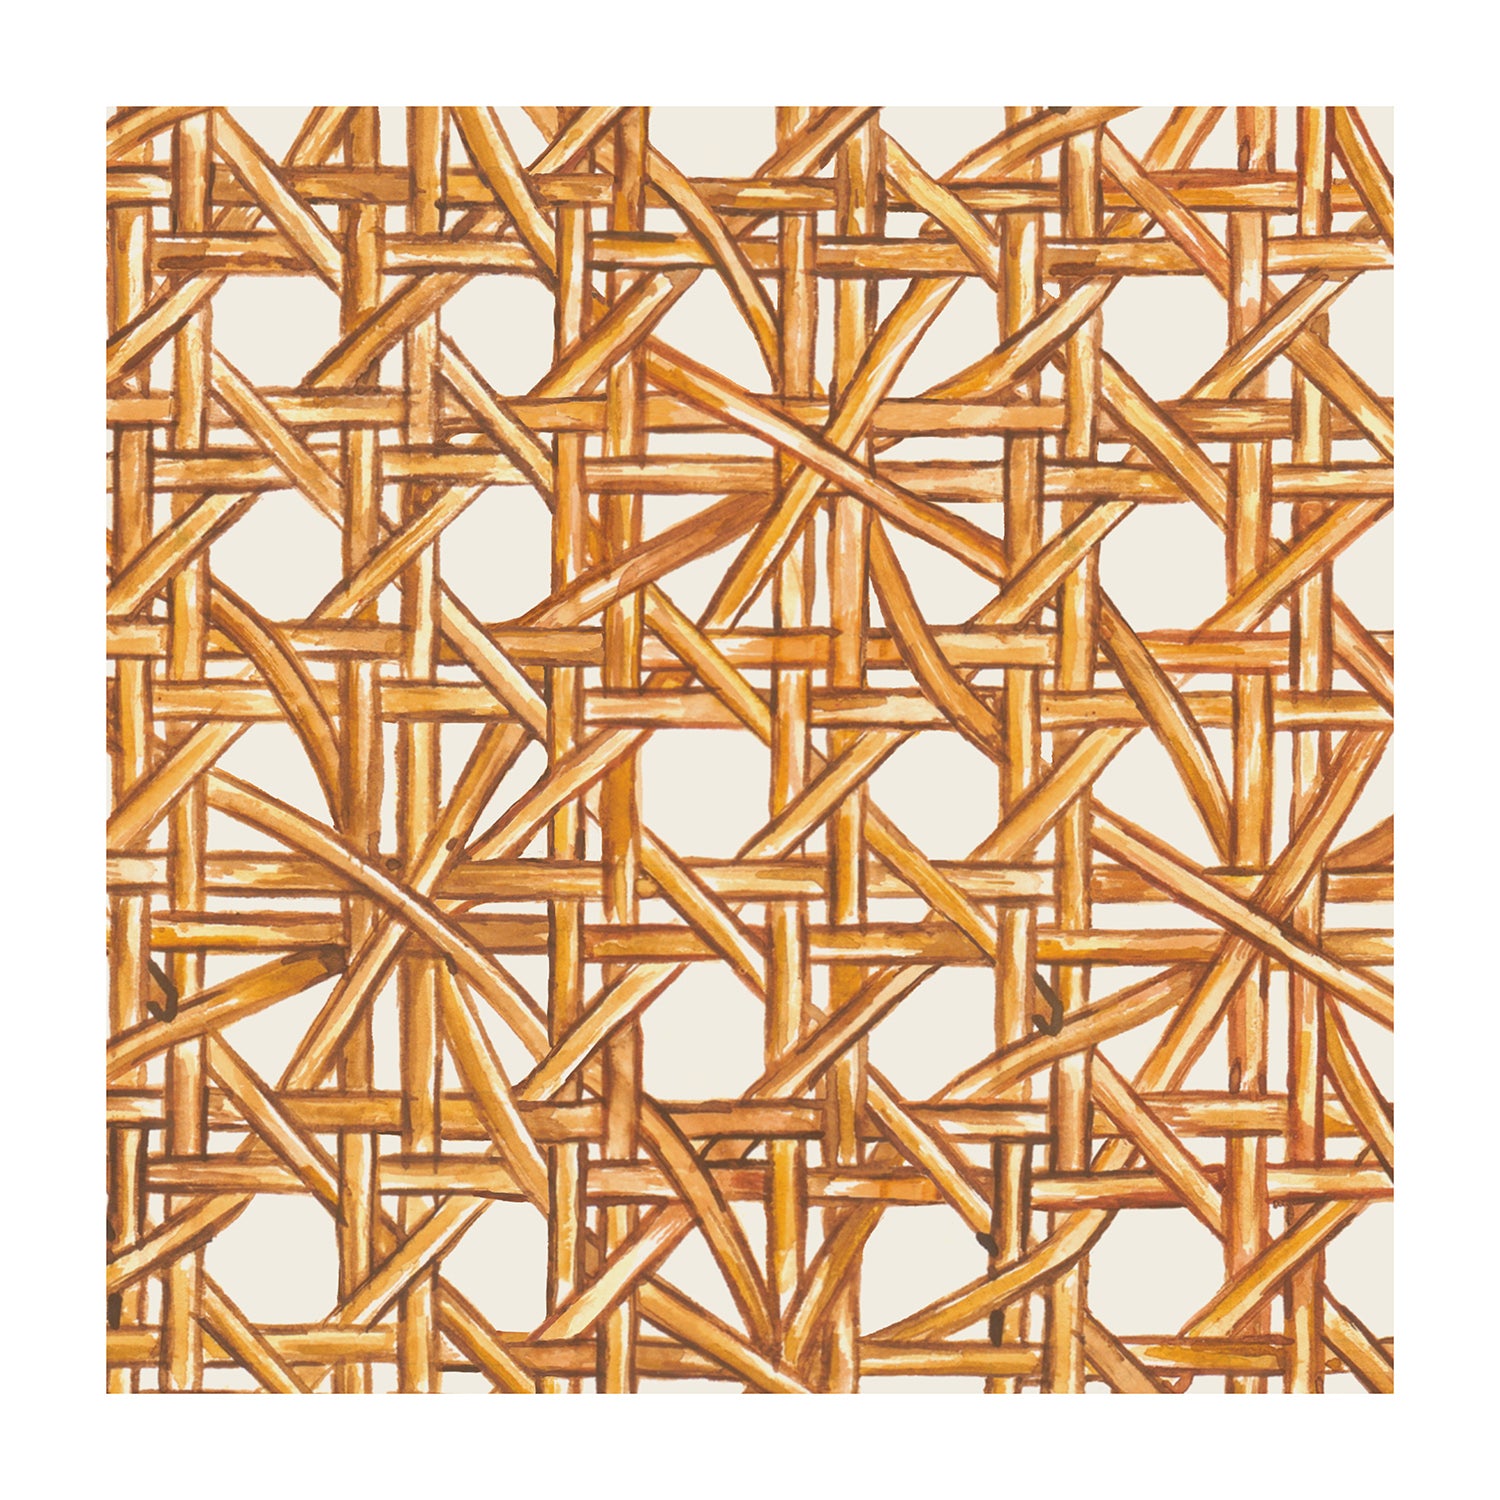 A square cocktail napkin featuring an illustrated pattern of tan rattan strands woven together intricately over a white background.